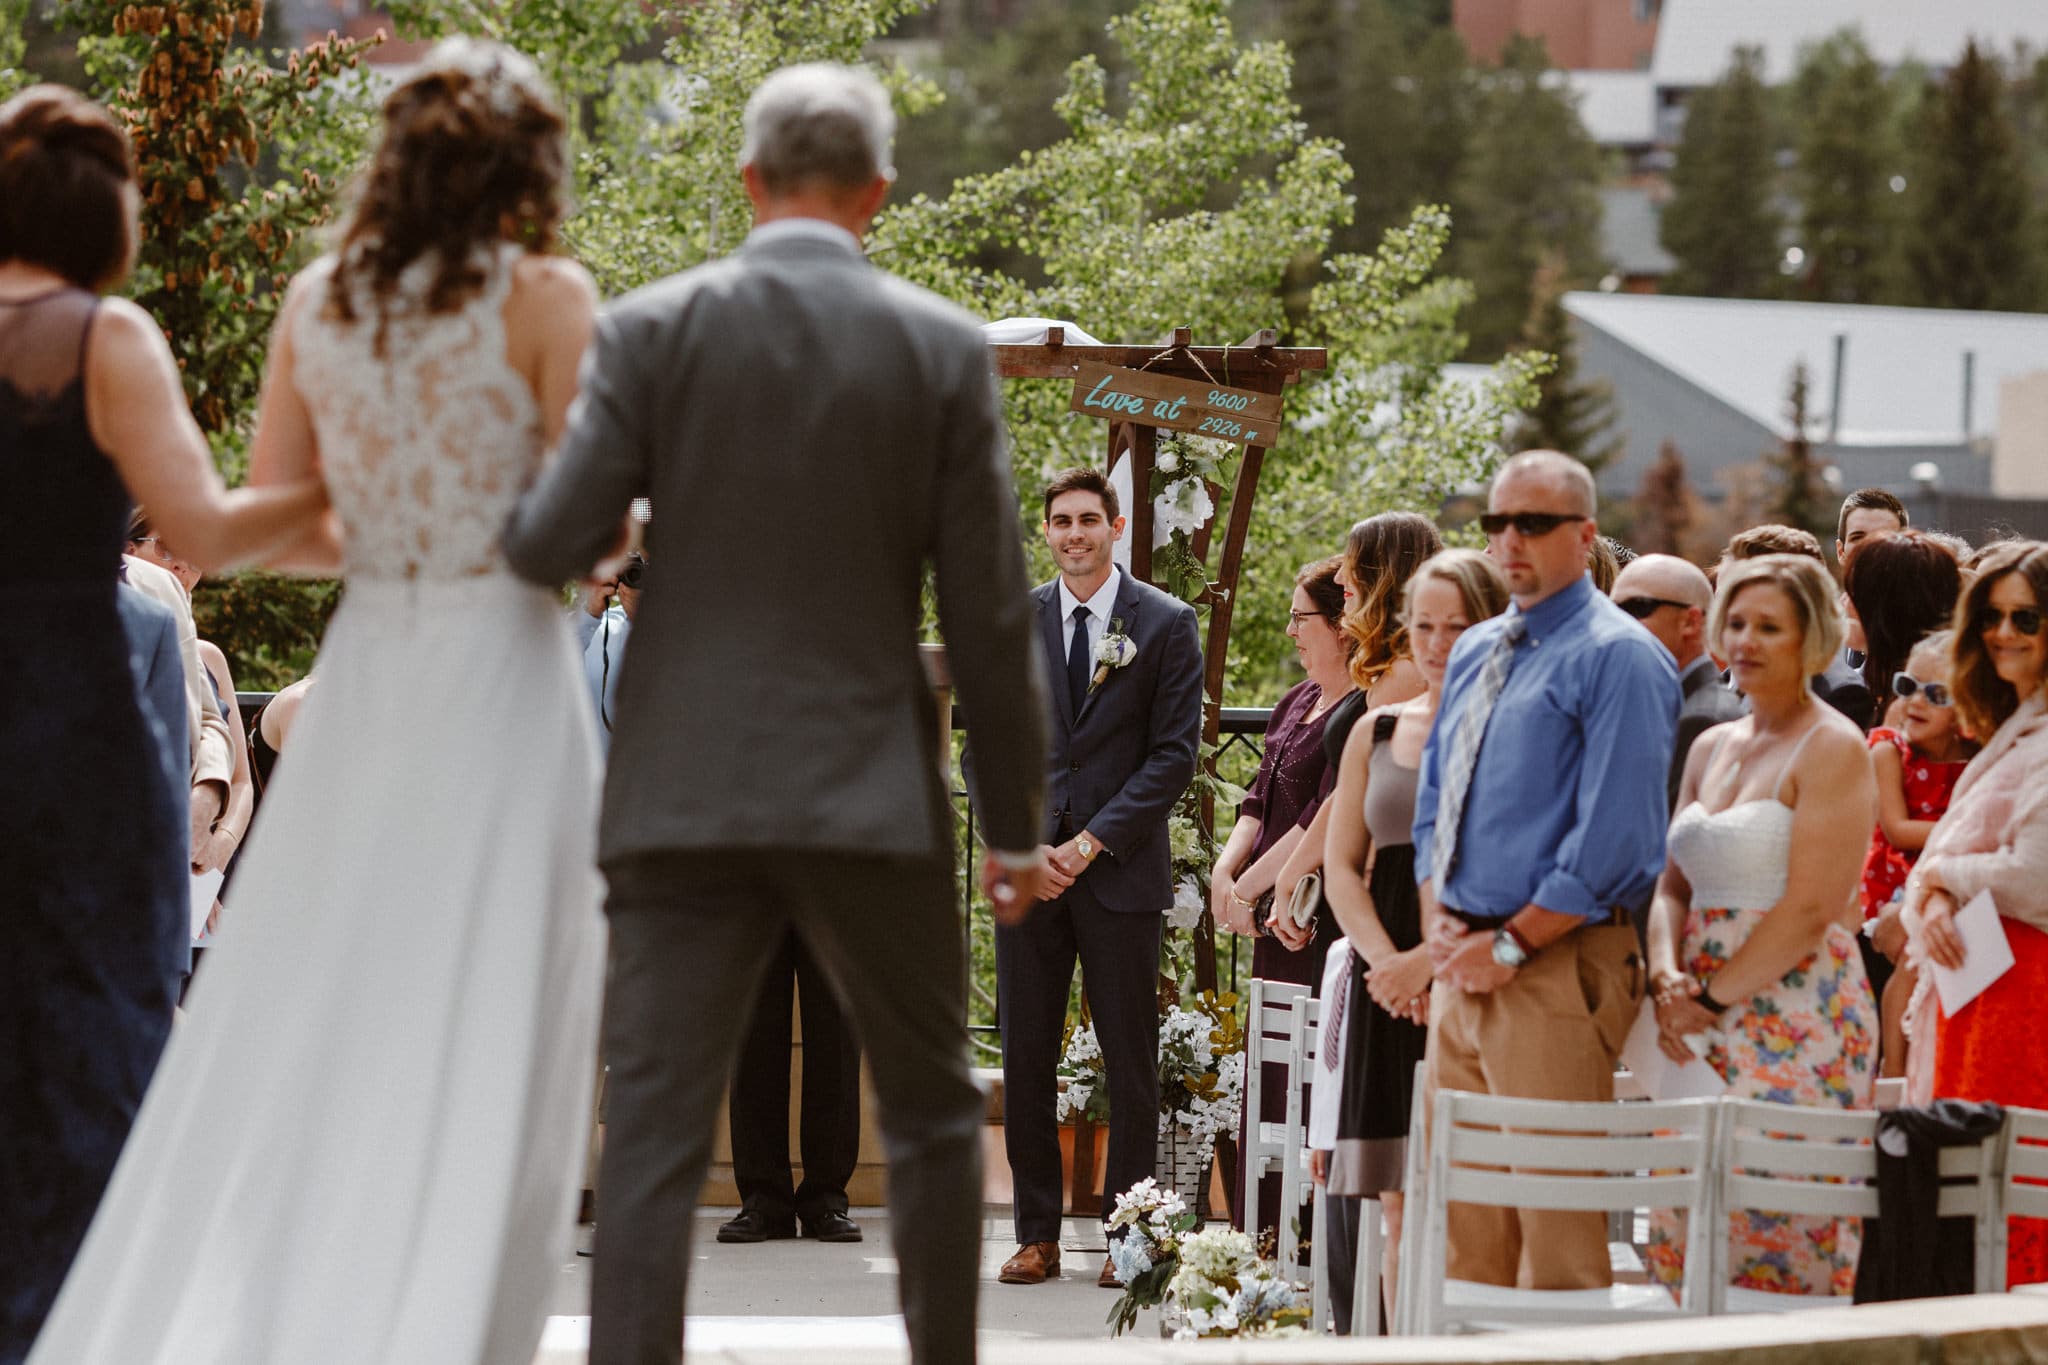 Bride and parents walking down the aisle at Main Street Station wedding, Breckenridge wedding photographer